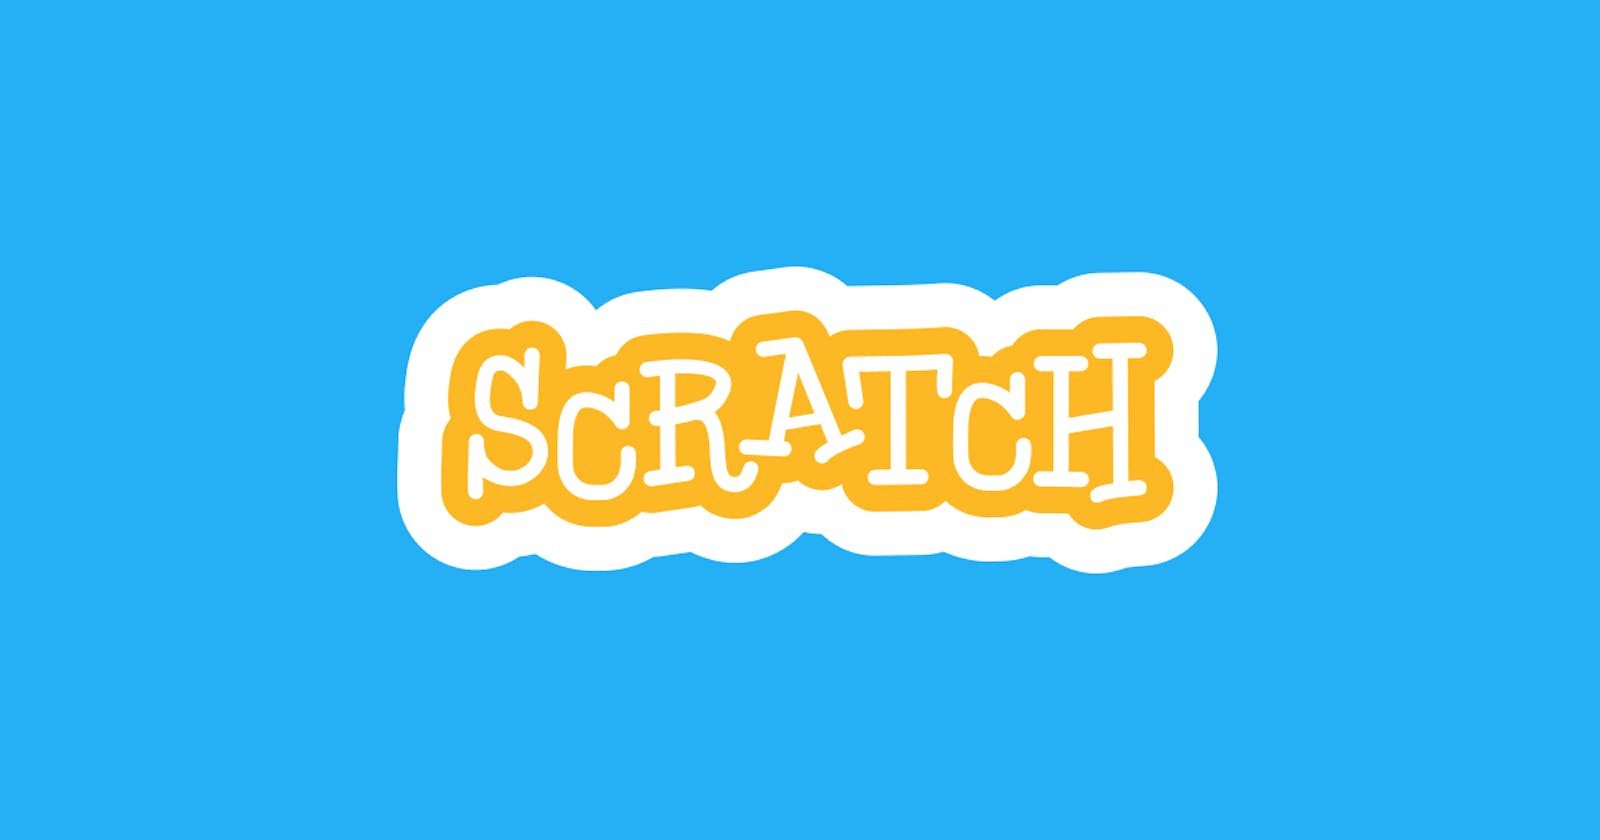 Scratch is Addictive: How to get rid of your Scratch addiction